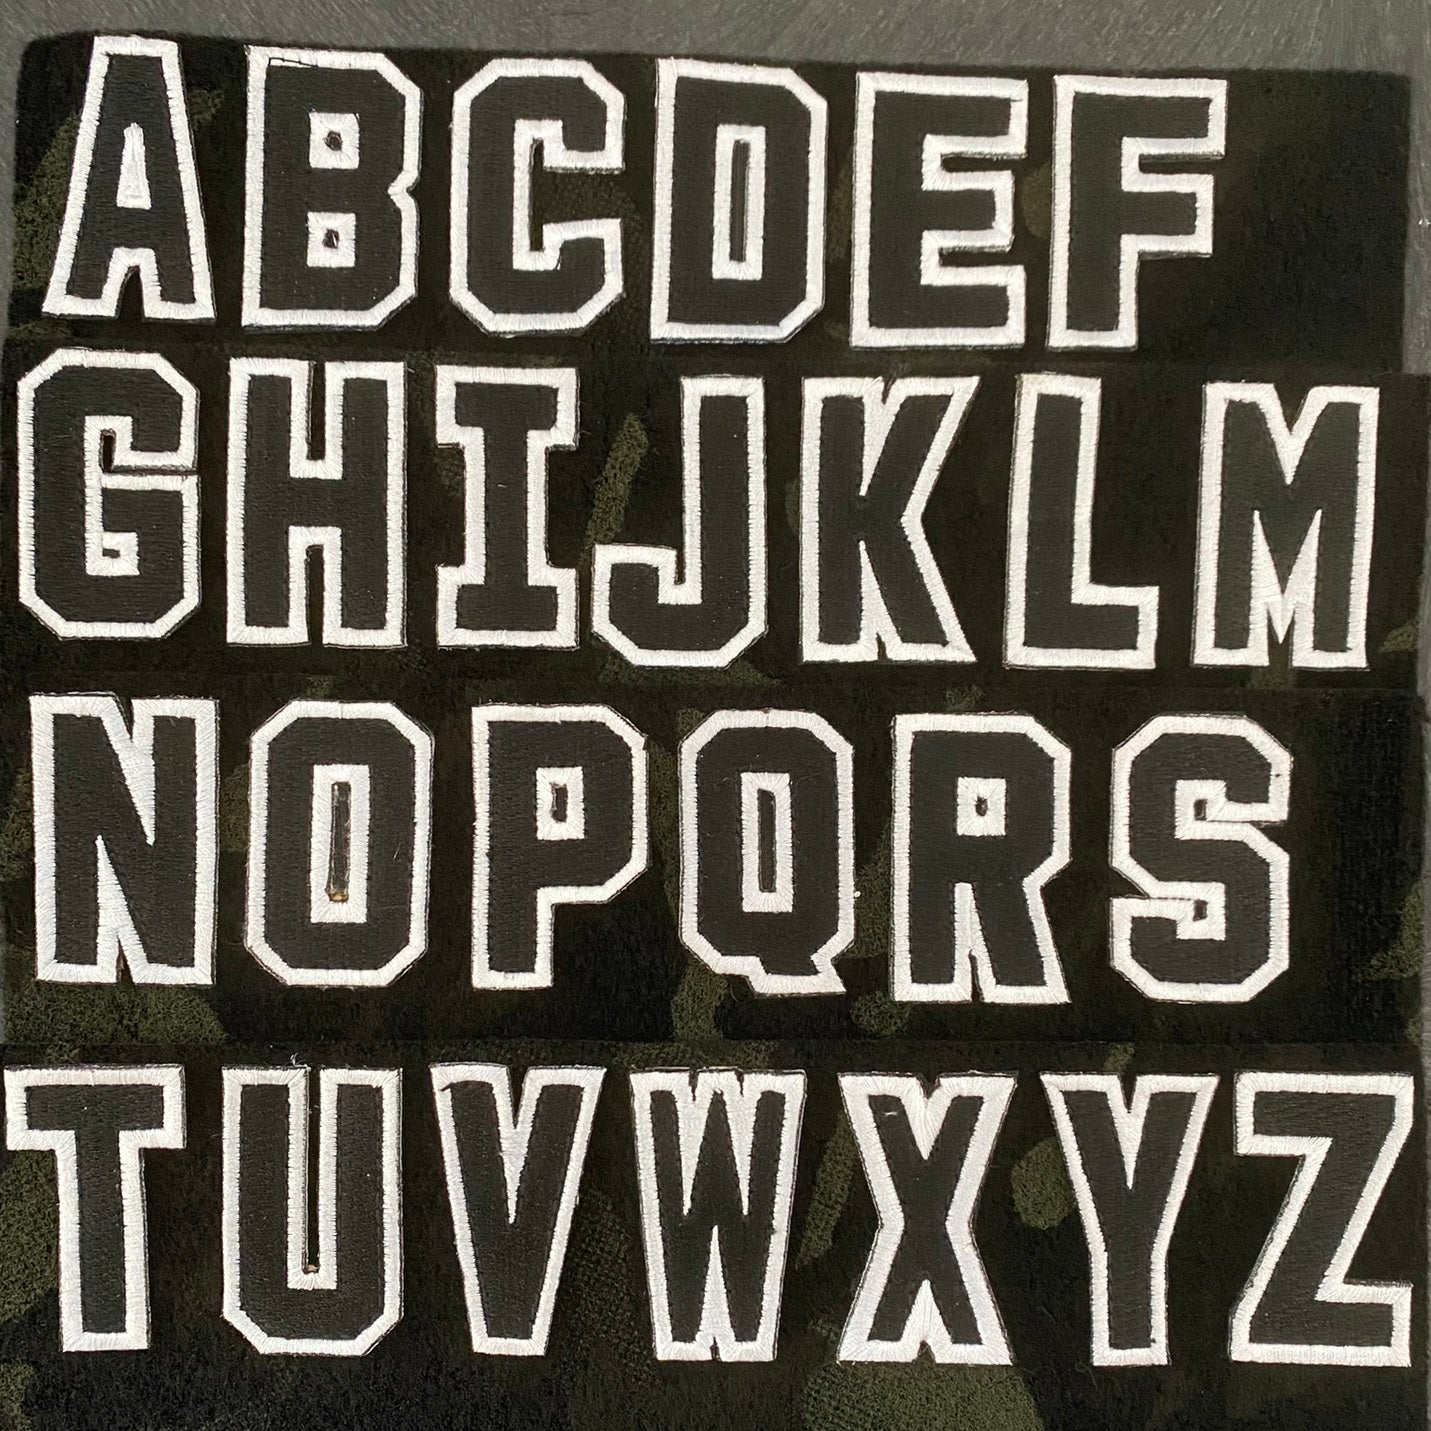 Spell Anything - Tactical Letters - 2 x 1.25 - Black